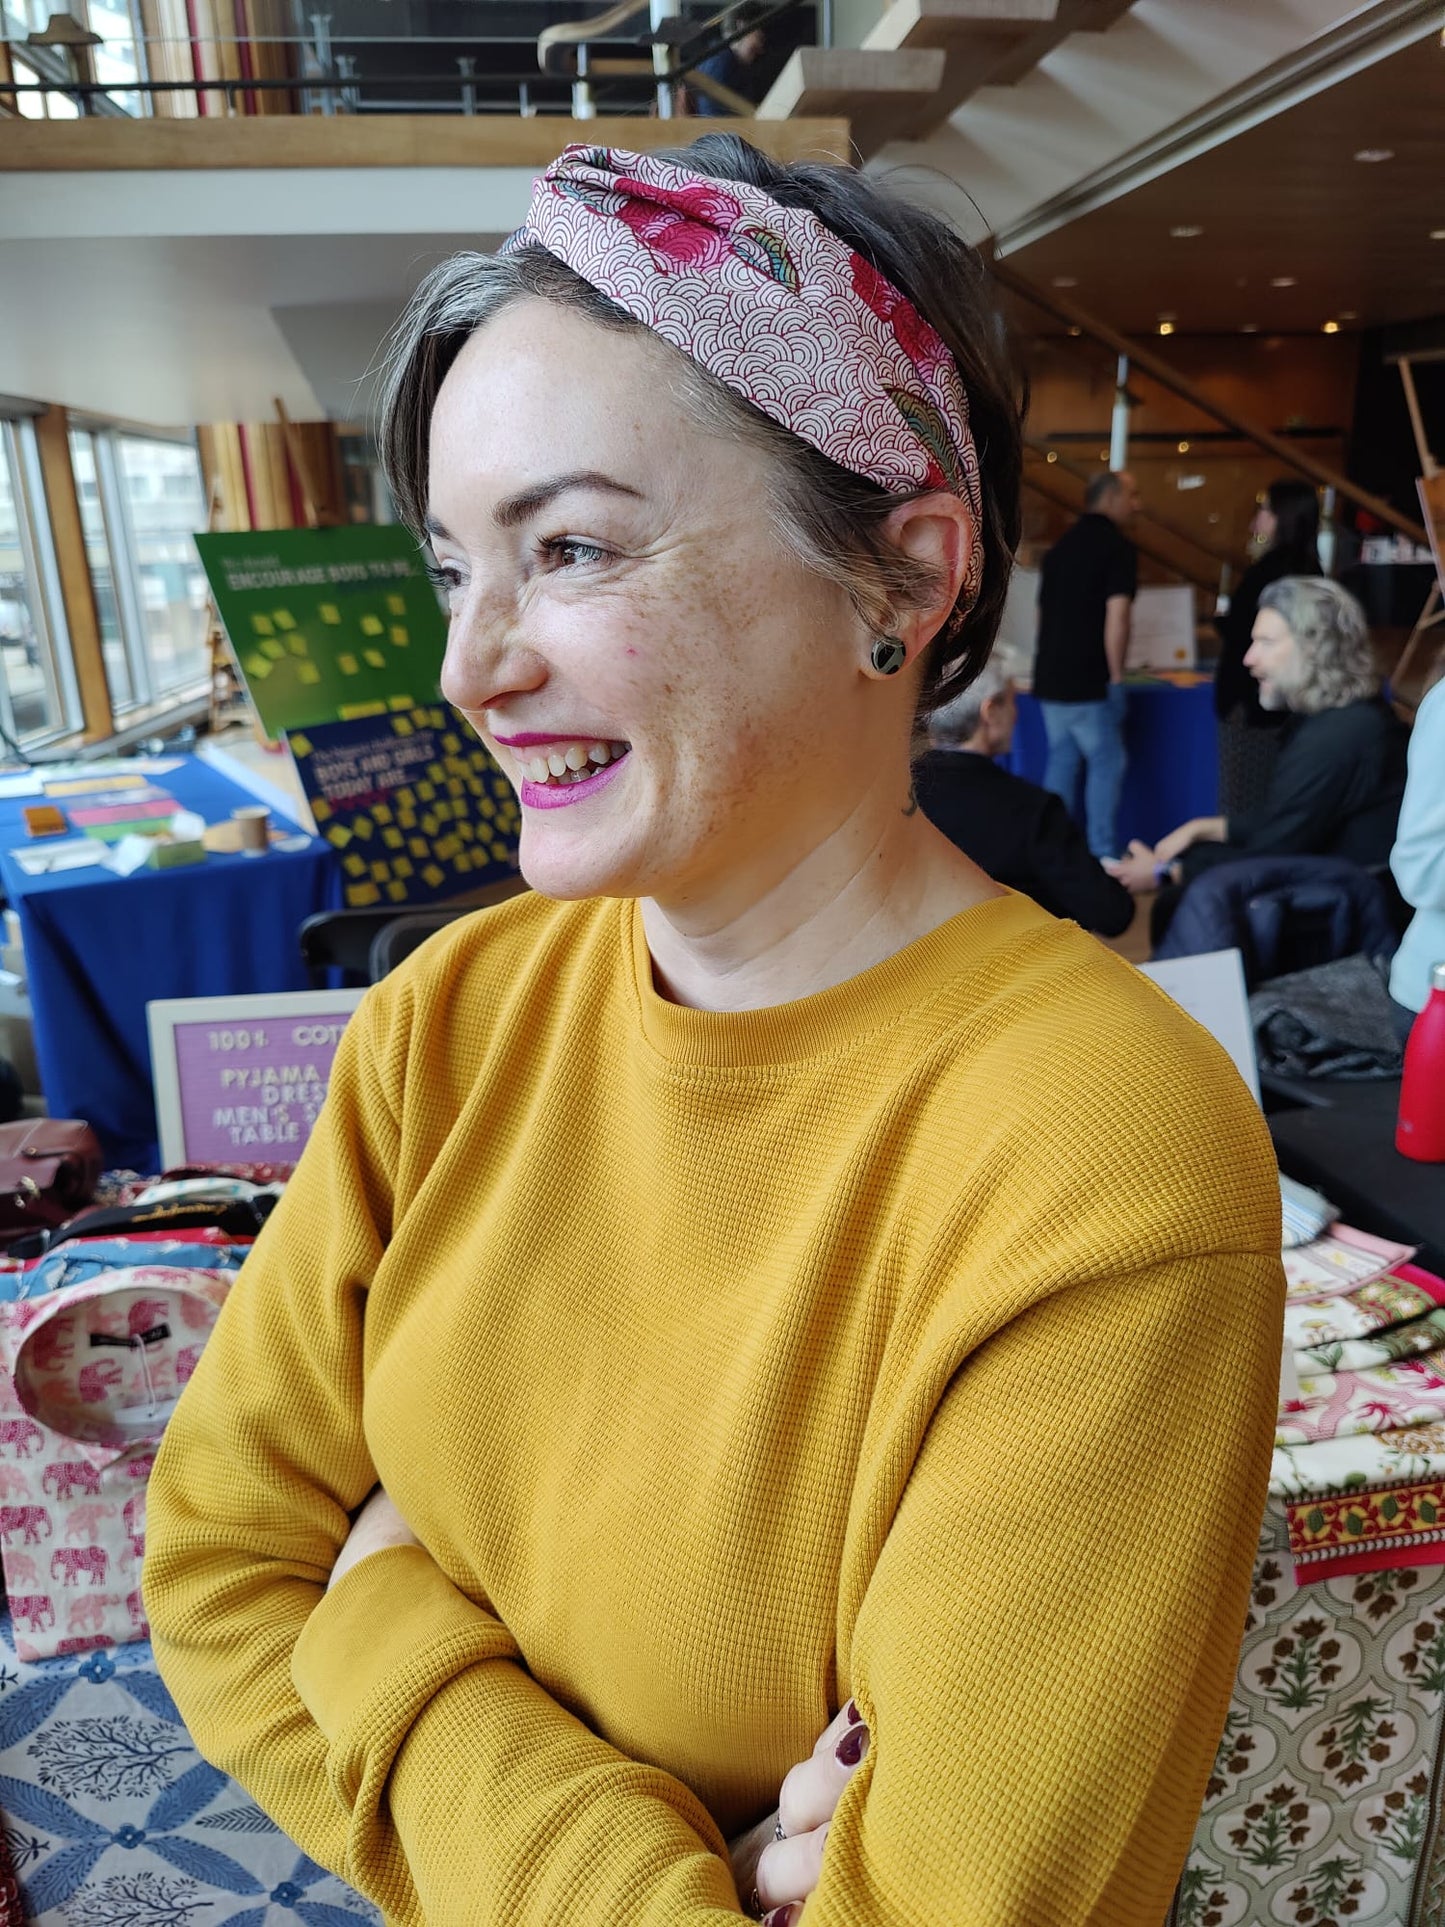 Lady wearing a yellow jumper and red headband, smiling and looking away from the camera.away from 